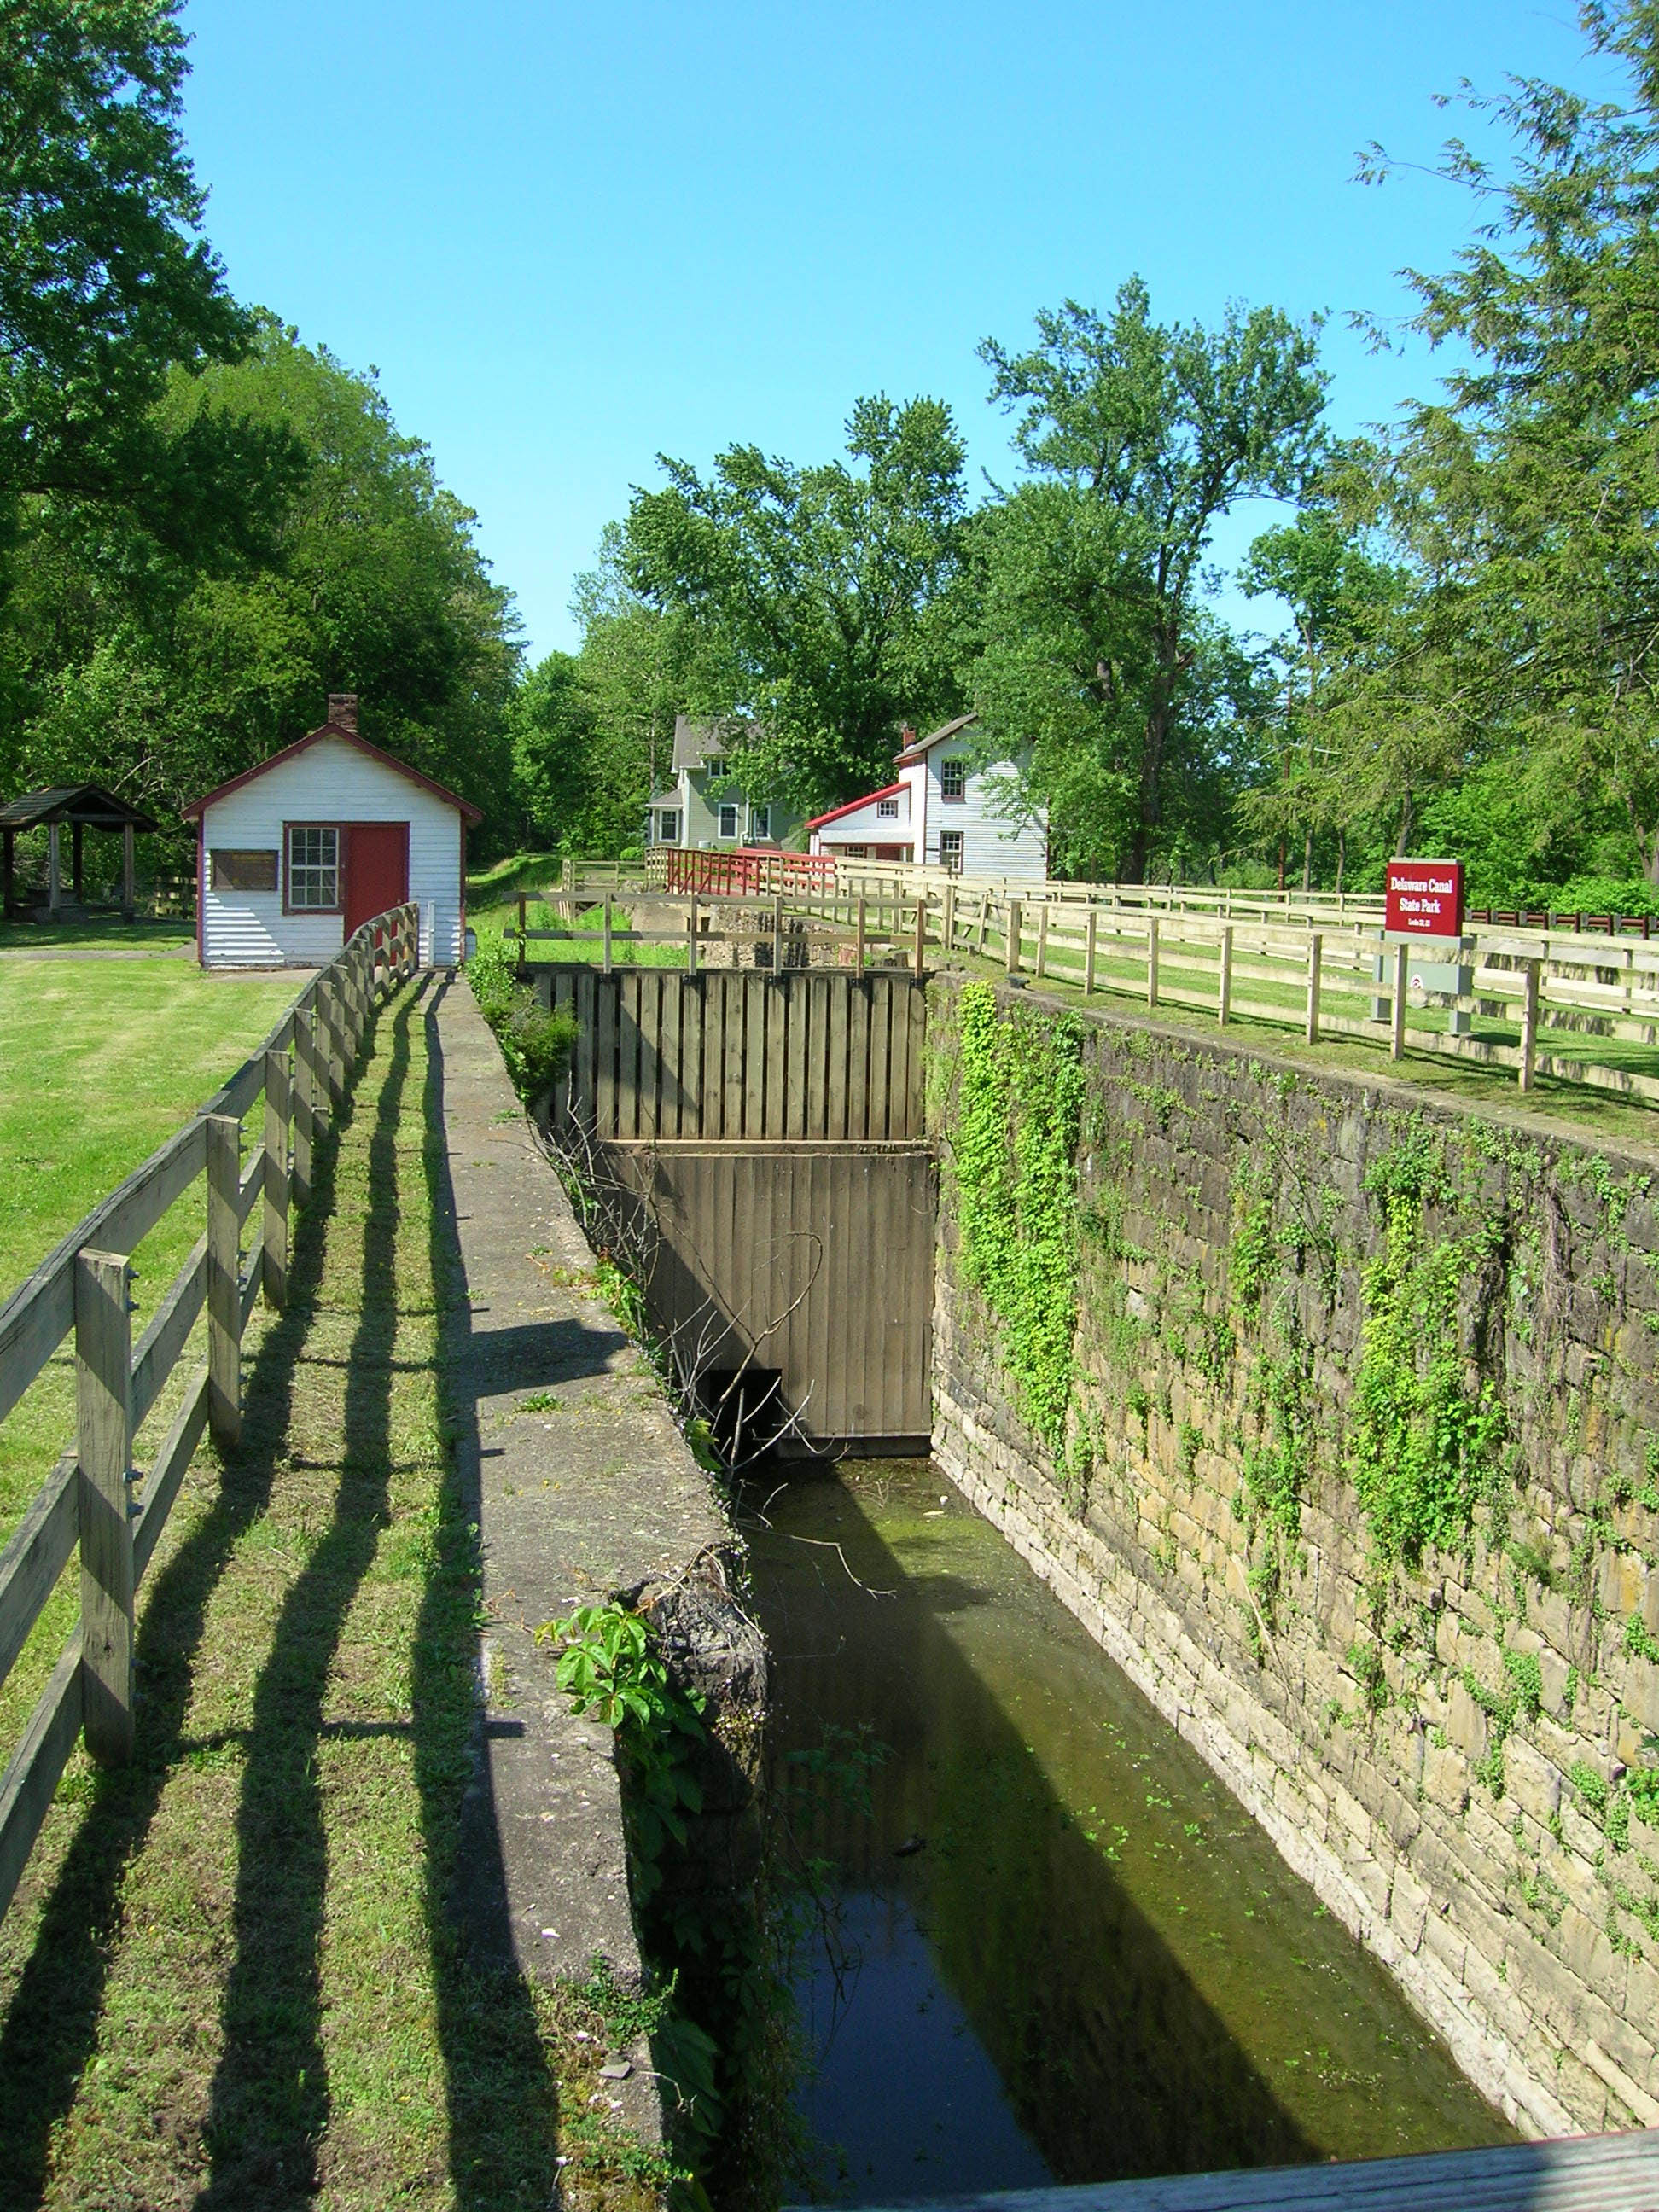 A rural boat lock with a gate